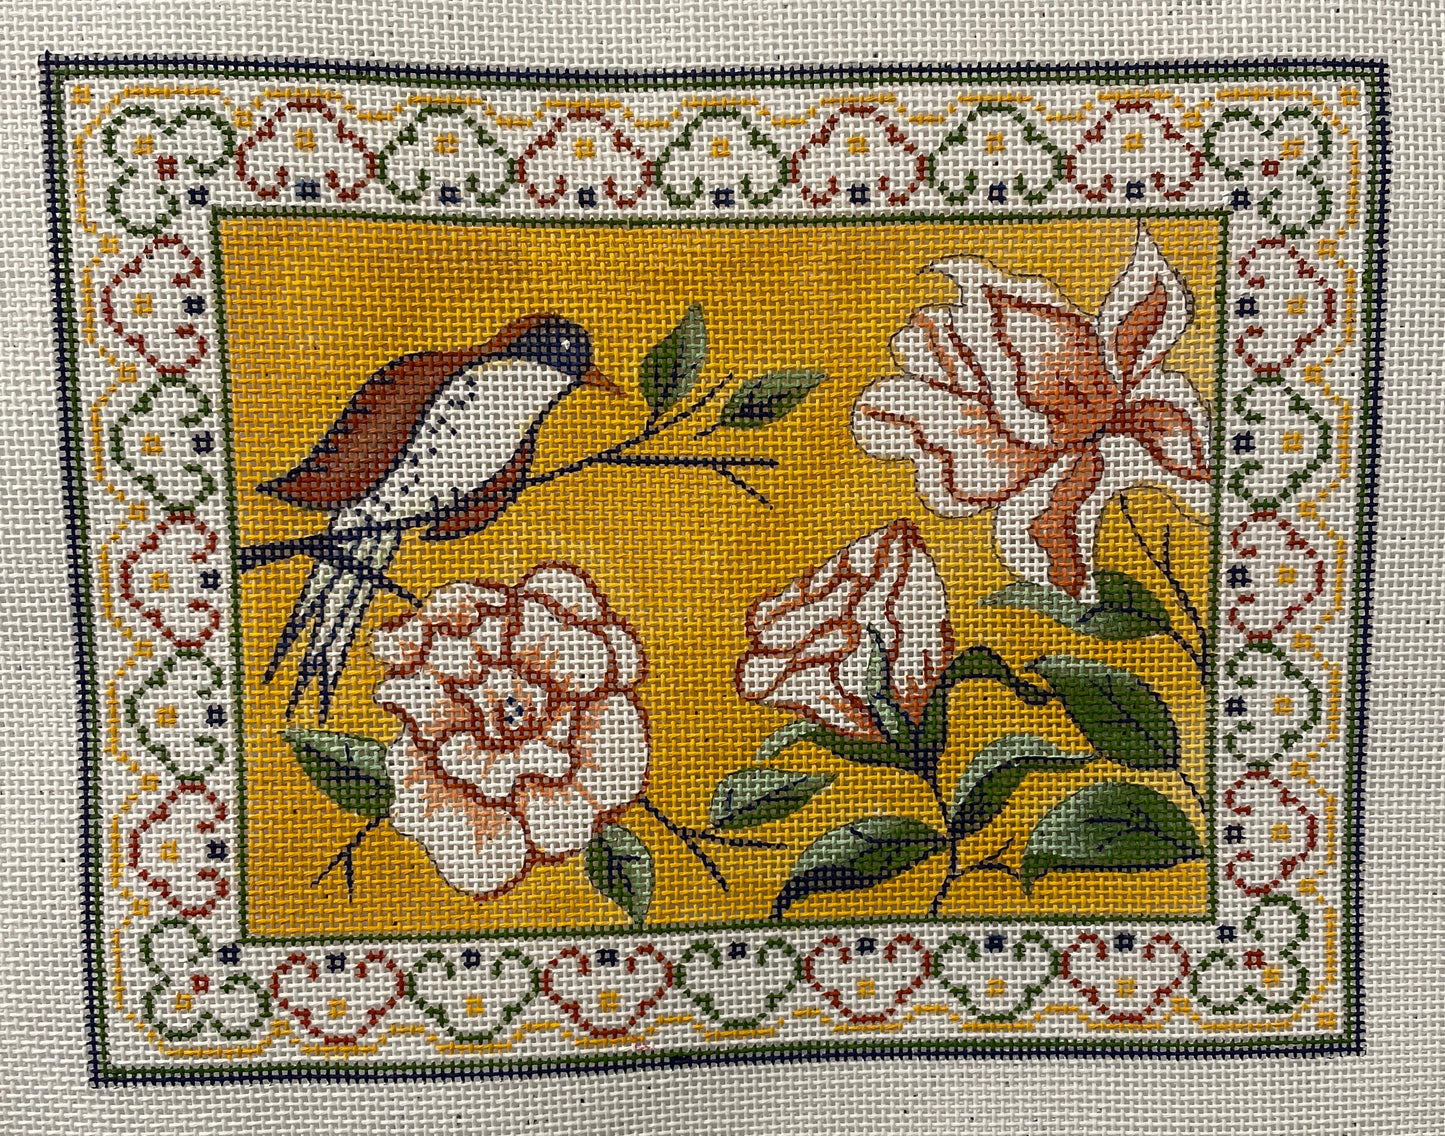 Bird with Roses